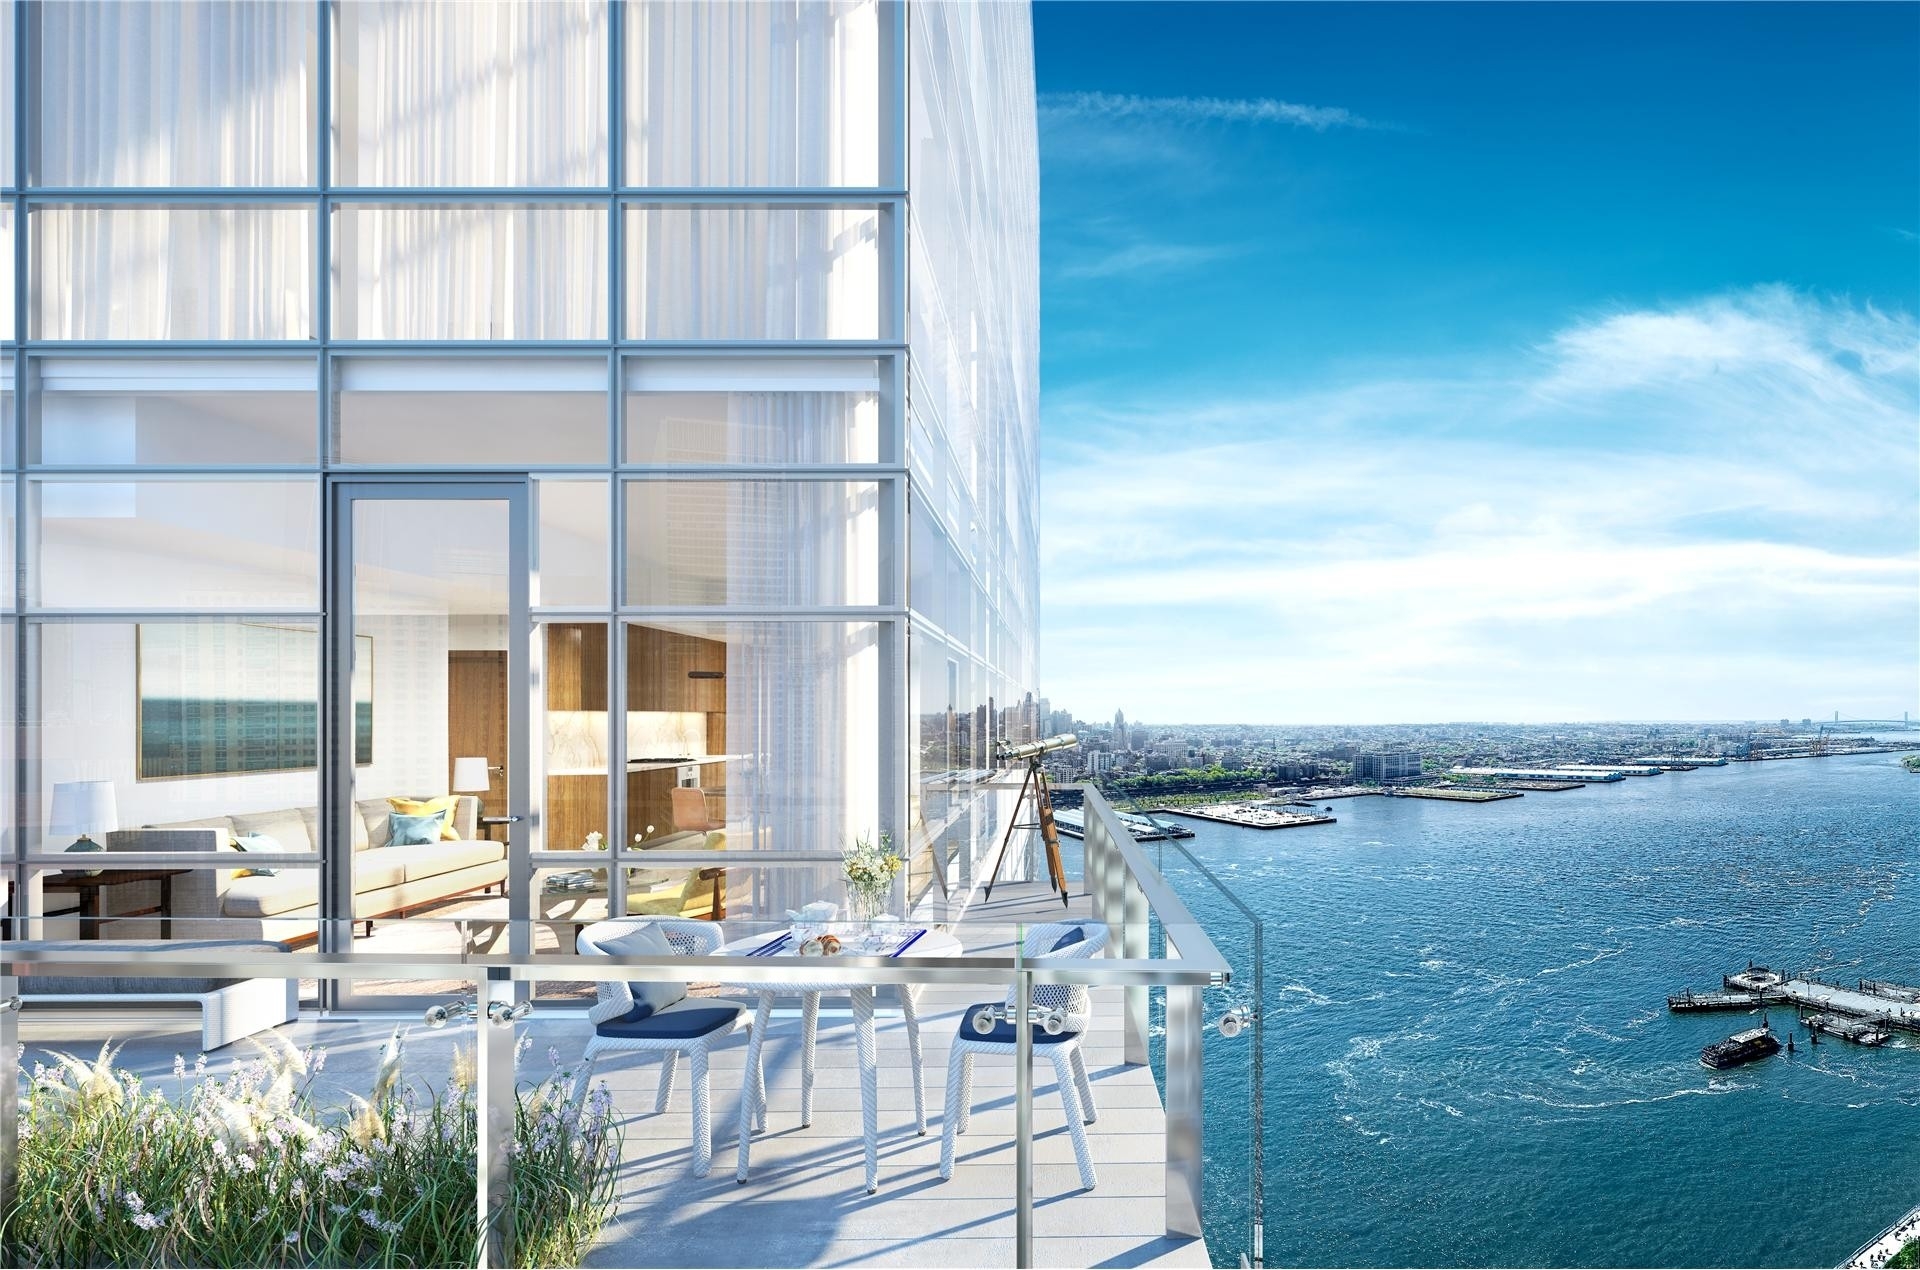 1. Condominiums for Sale at Seaport Residences, 161 MAIDEN LN, 33A South Street Seaport, New York, New York 10038